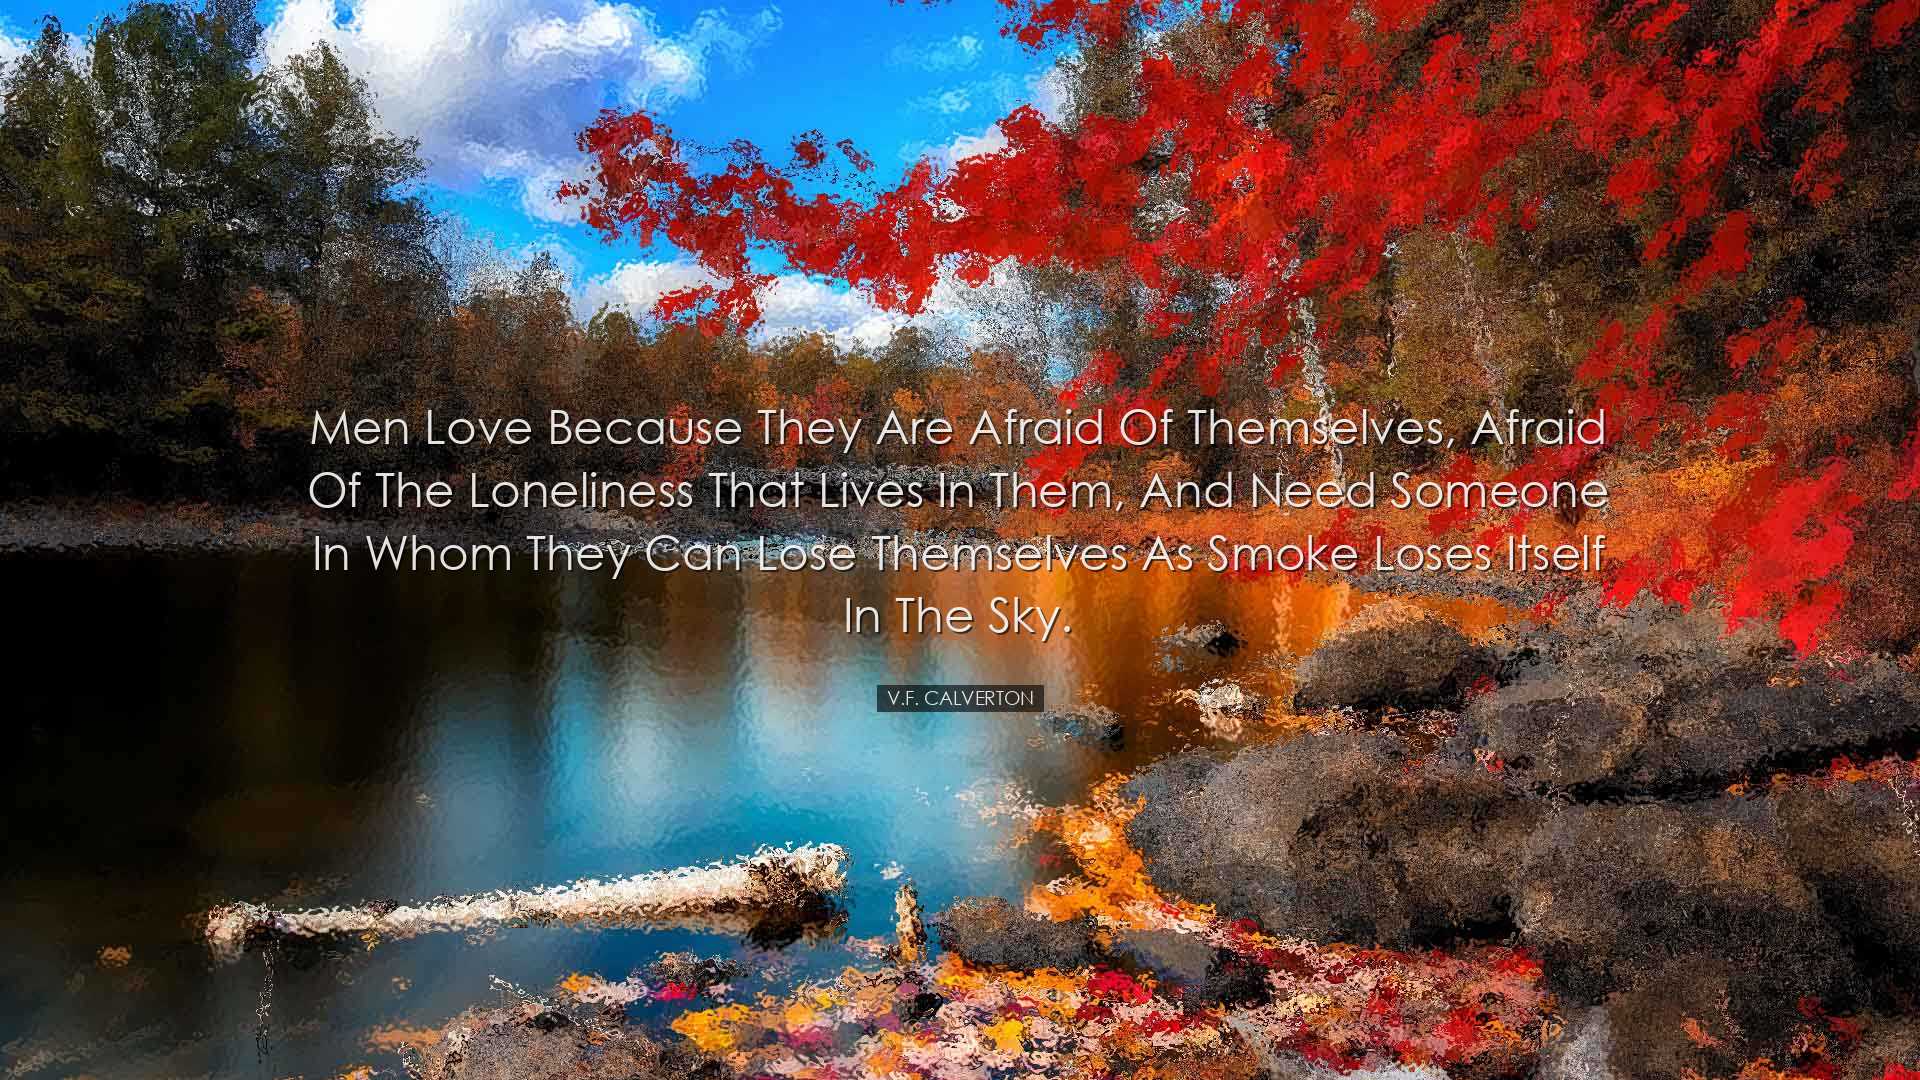 Men love because they are afraid of themselves, afraid of the lone